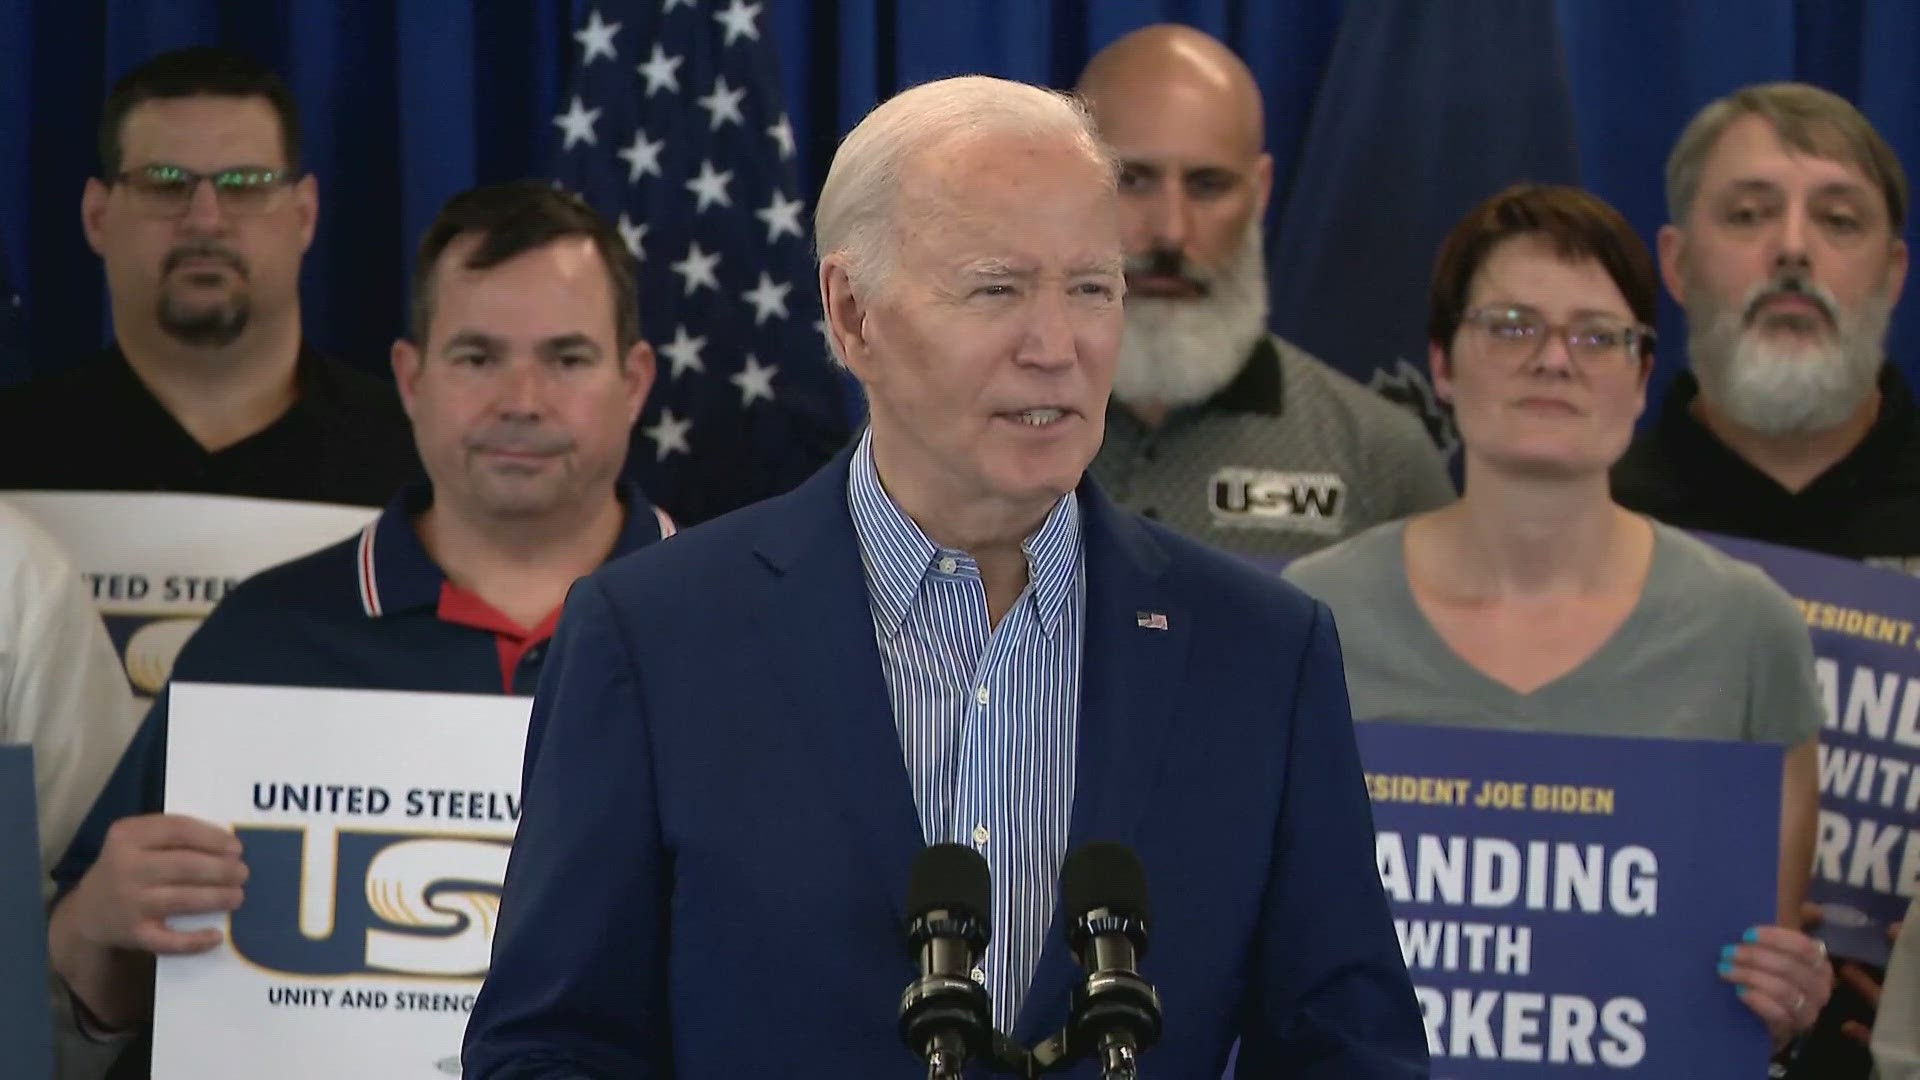 President Joe Biden discussed the plan while meeting with union steel workers in Pittsburgh.